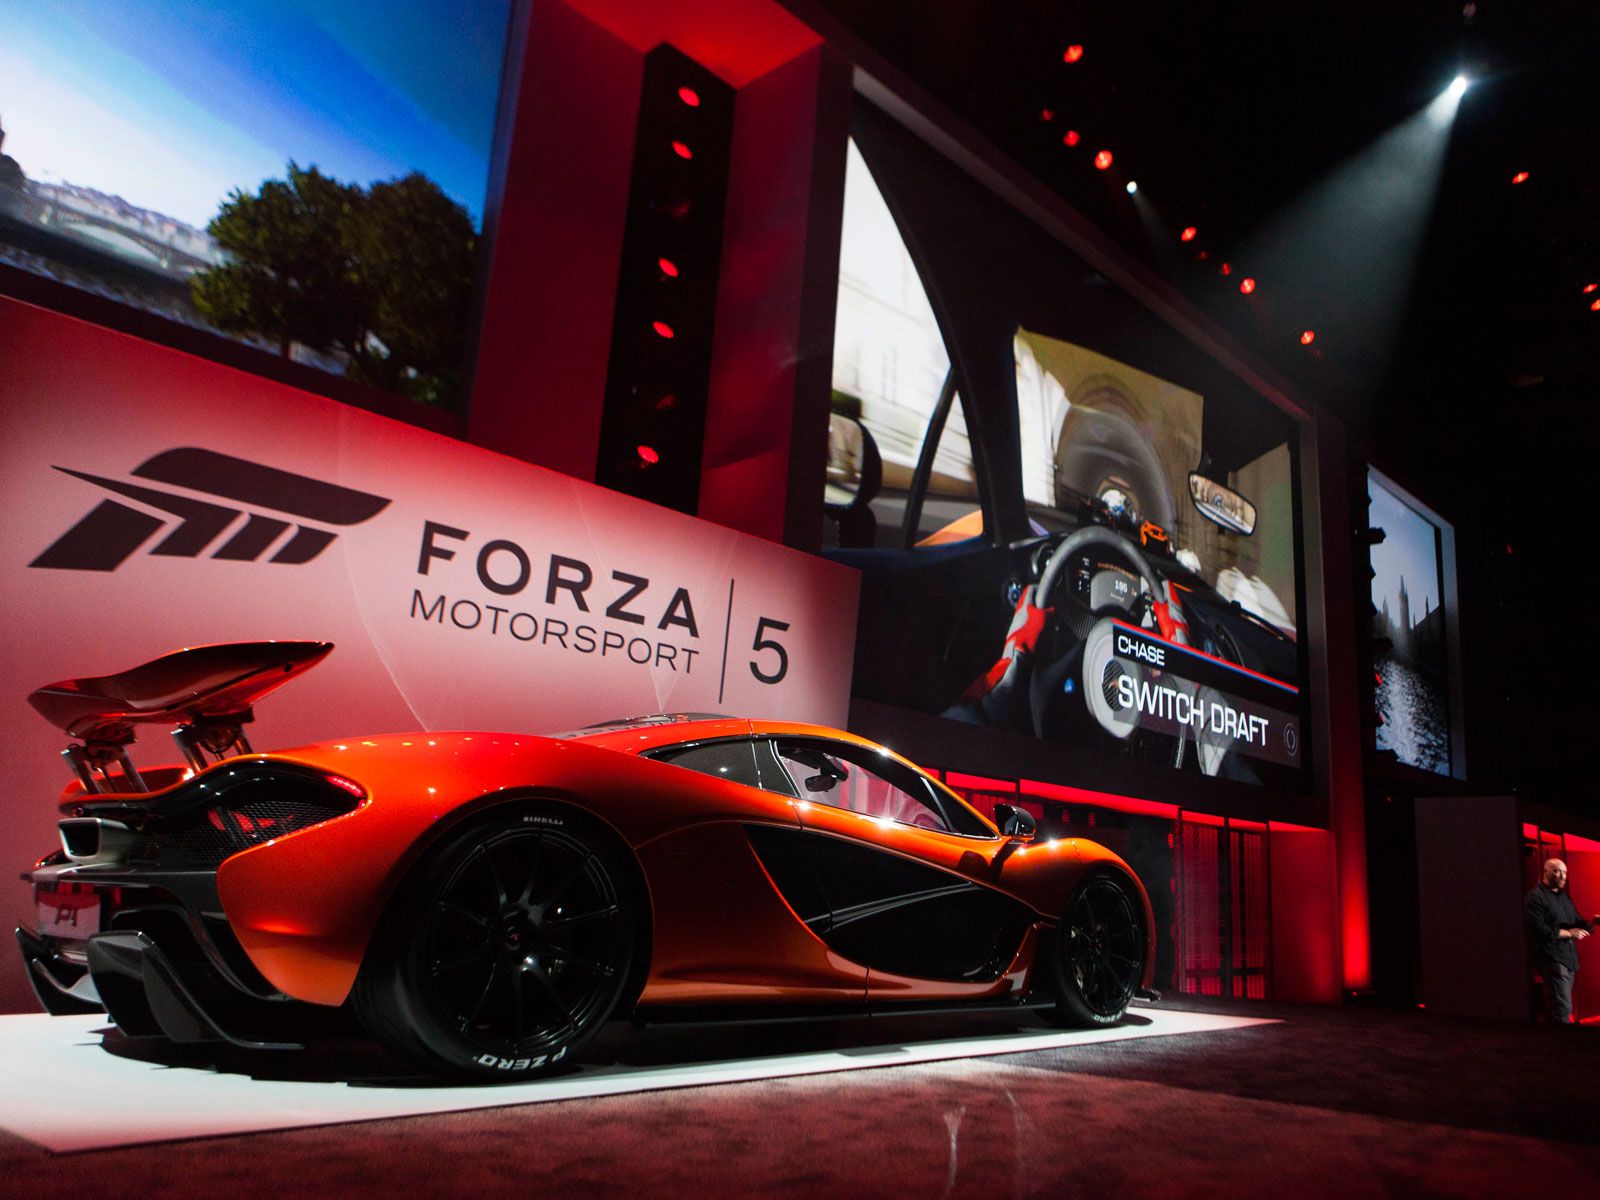 Forza Motorsports 5 and McLaren p1 Ride of a Lifetime Competition Car Magazine